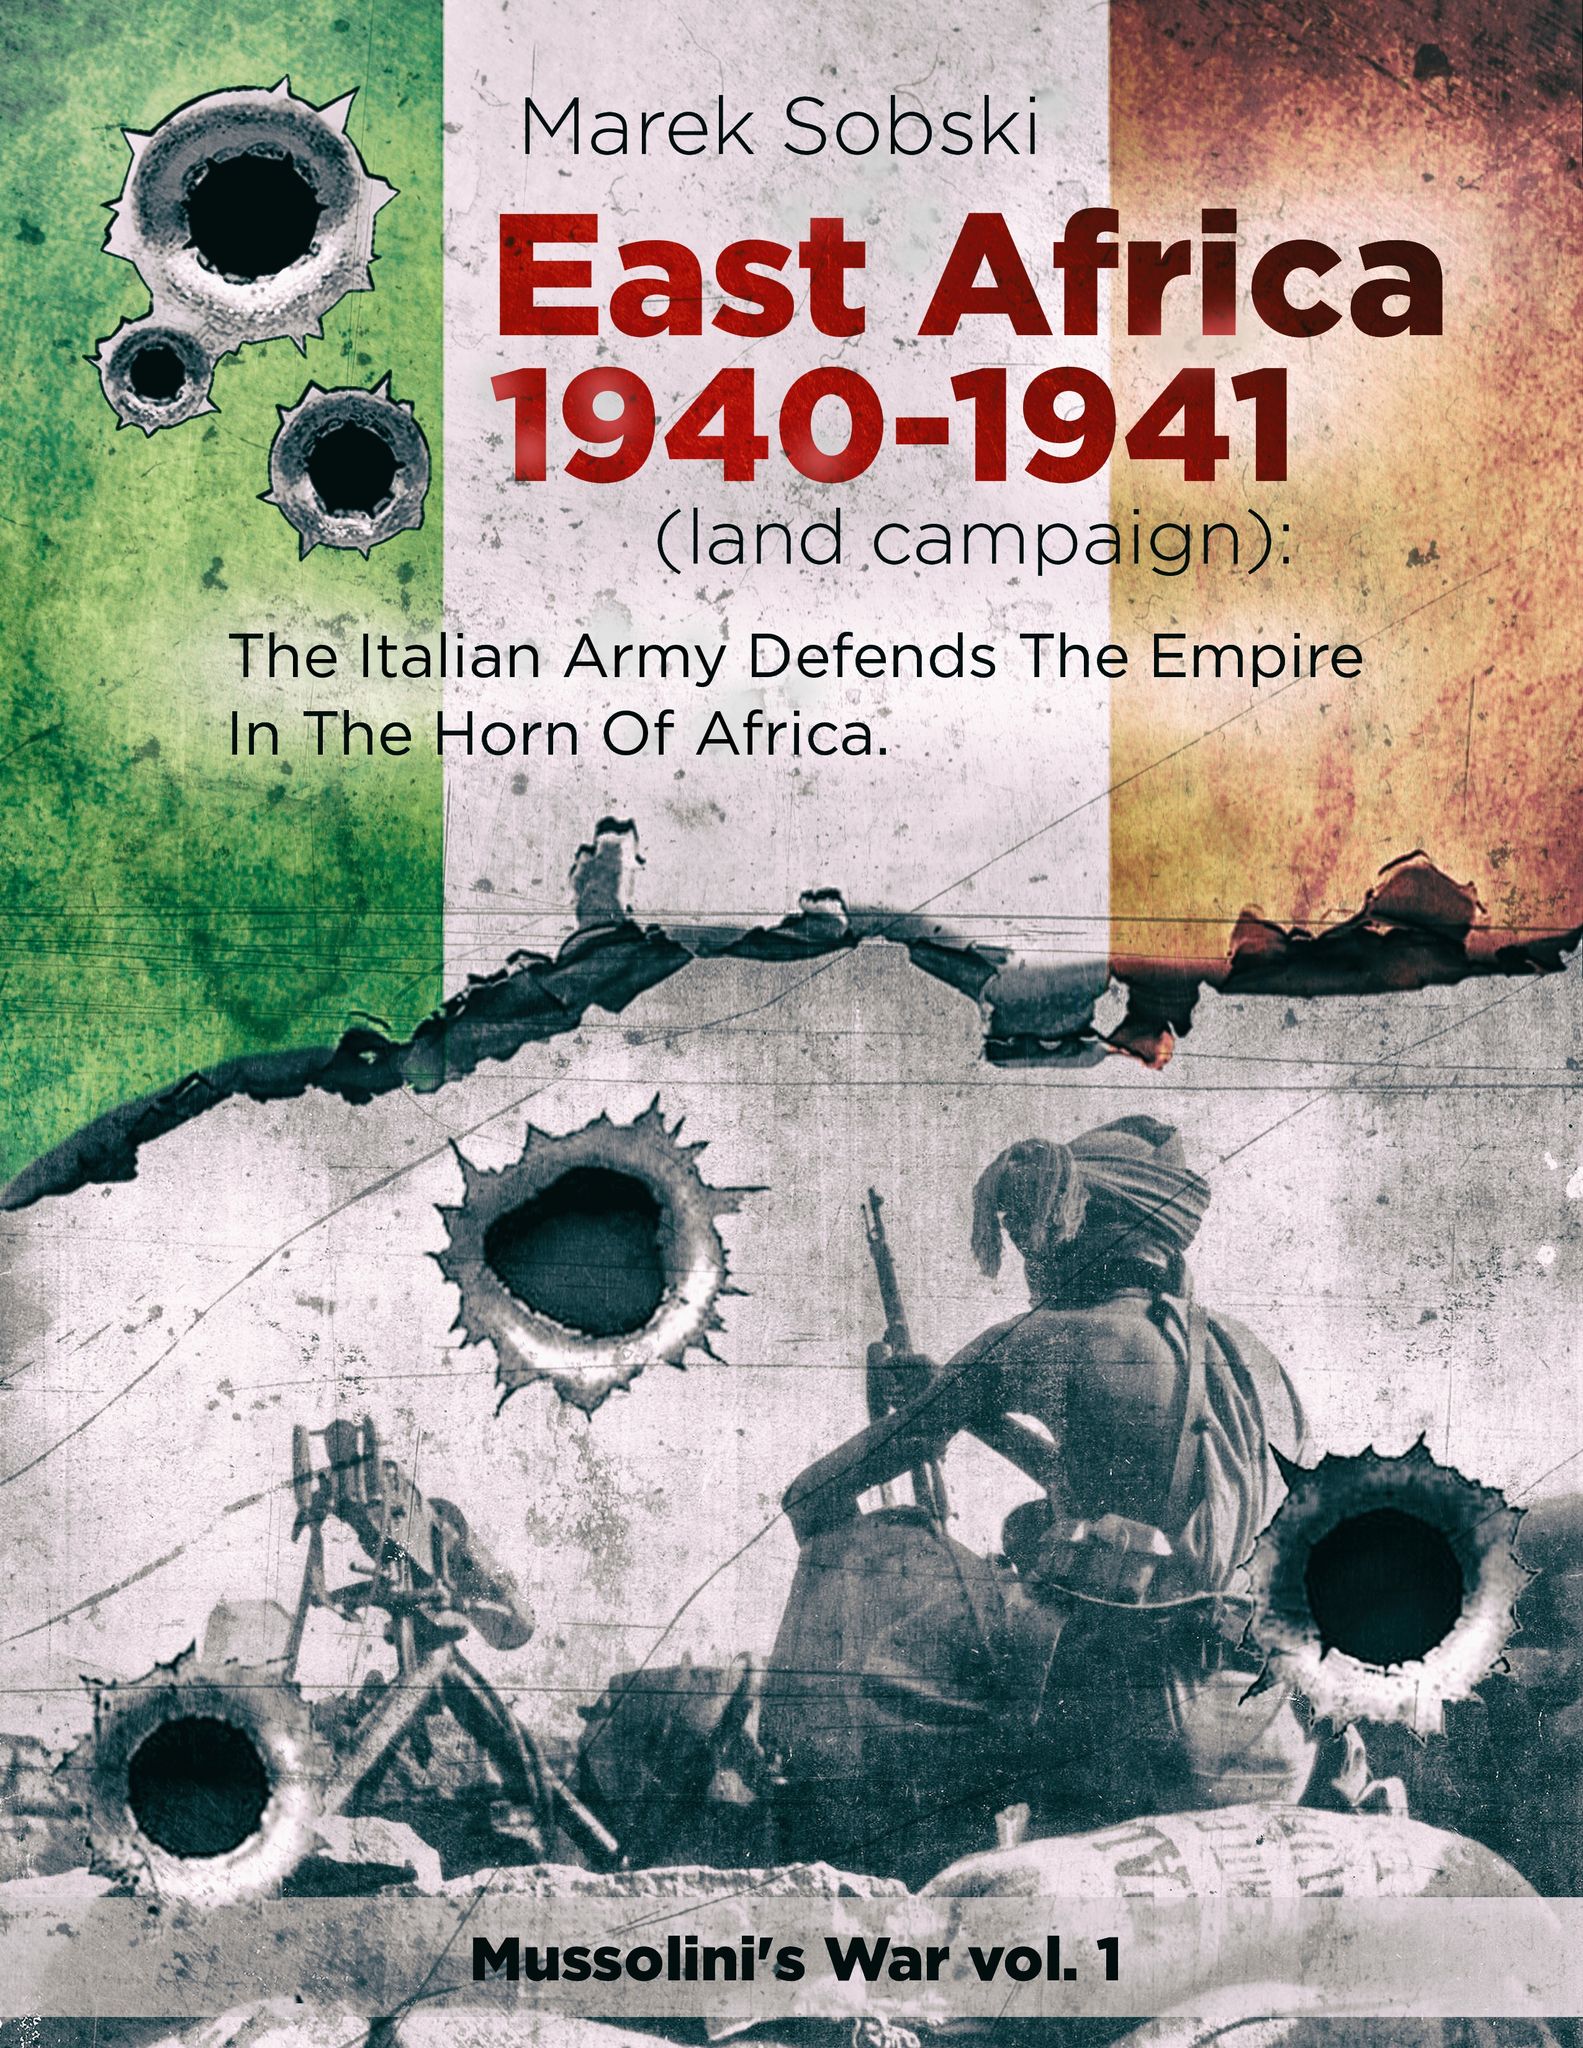 East Africa 1940-1941 (land campaign)